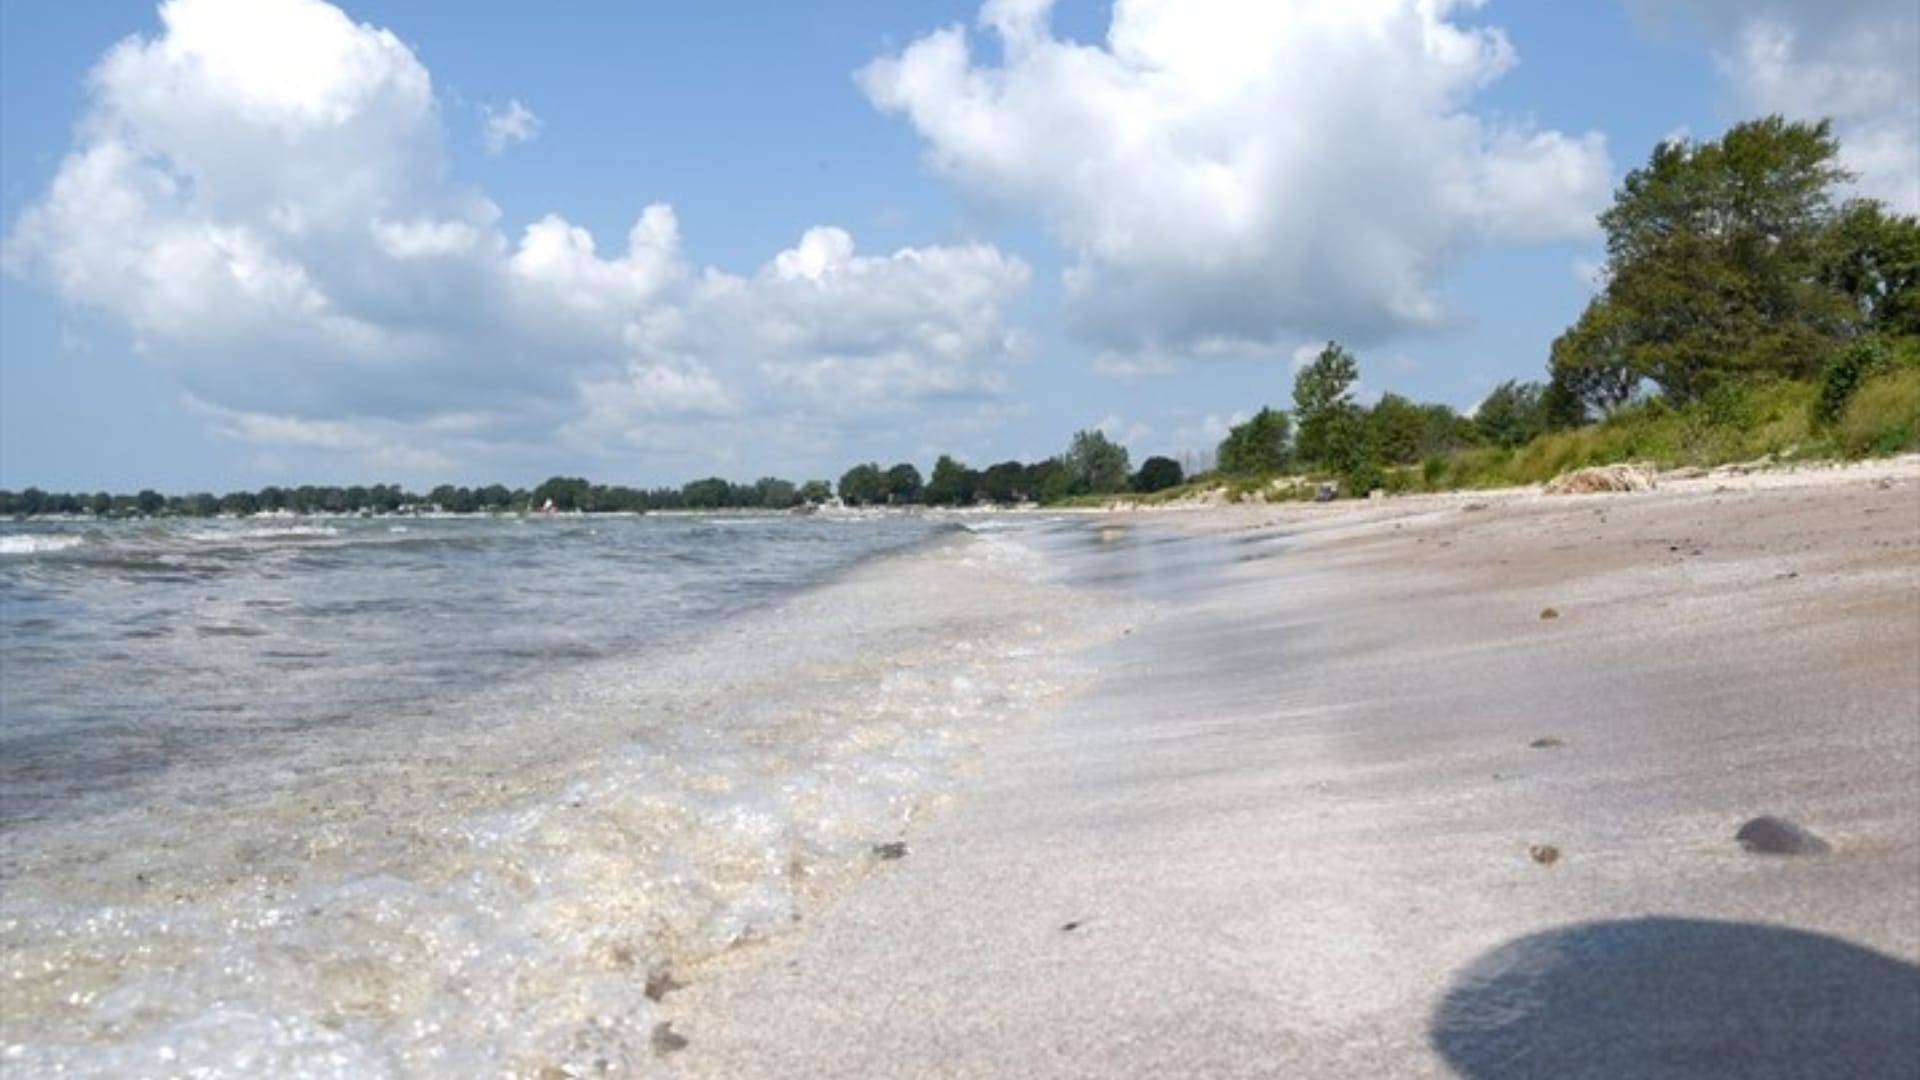 Augustine Lakeshore Access Property to Close Early for Shoreline Protection